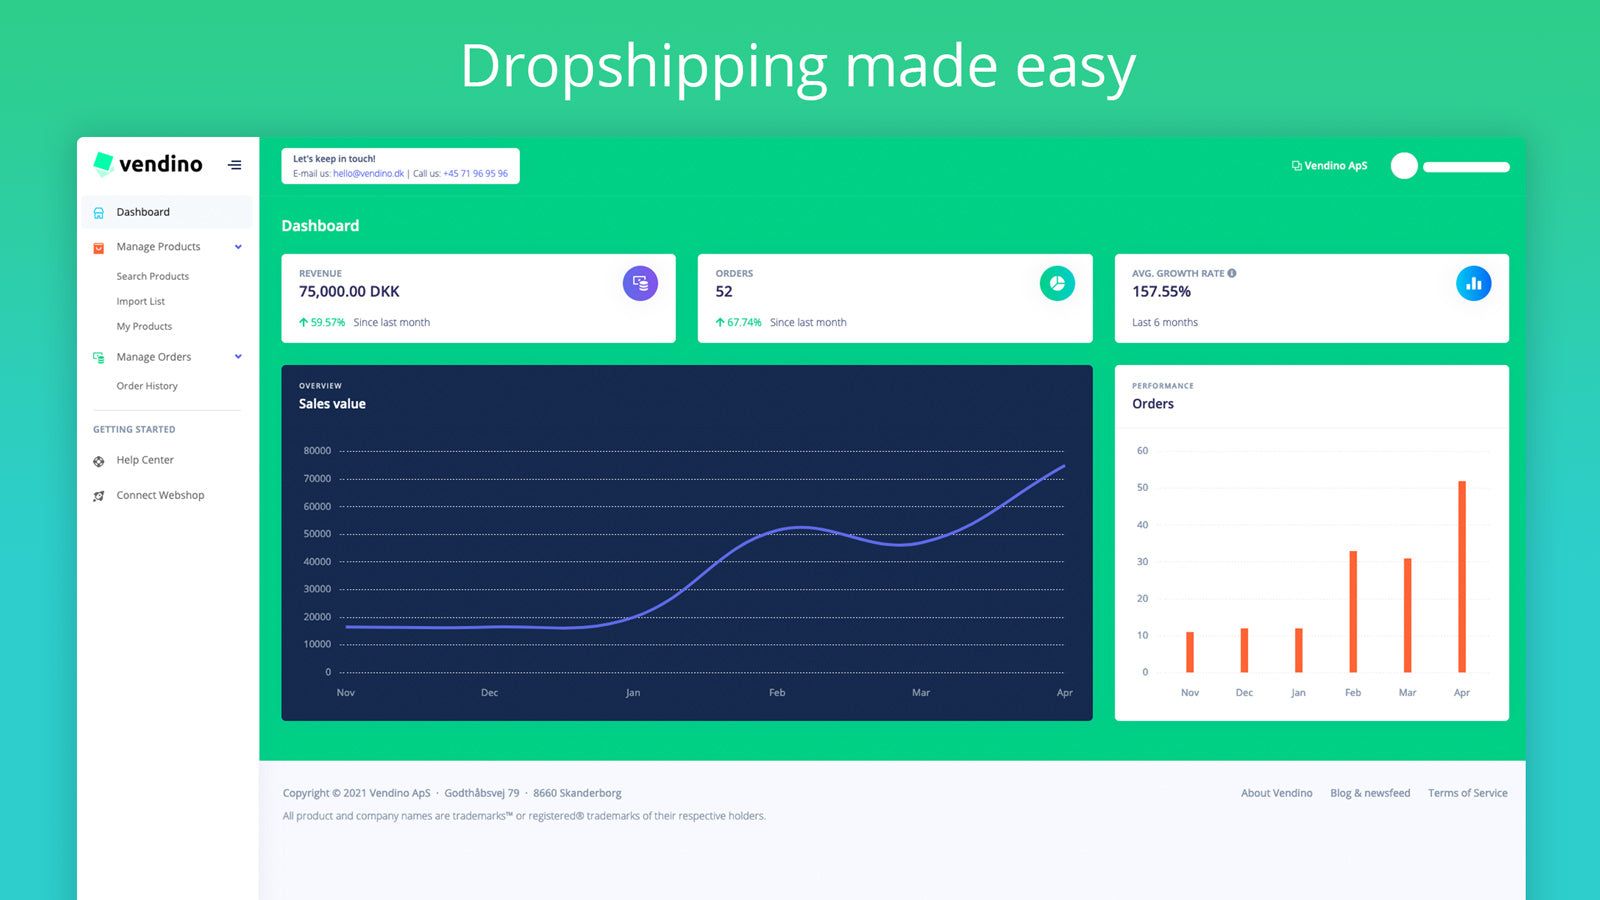 Dropshipping made easy